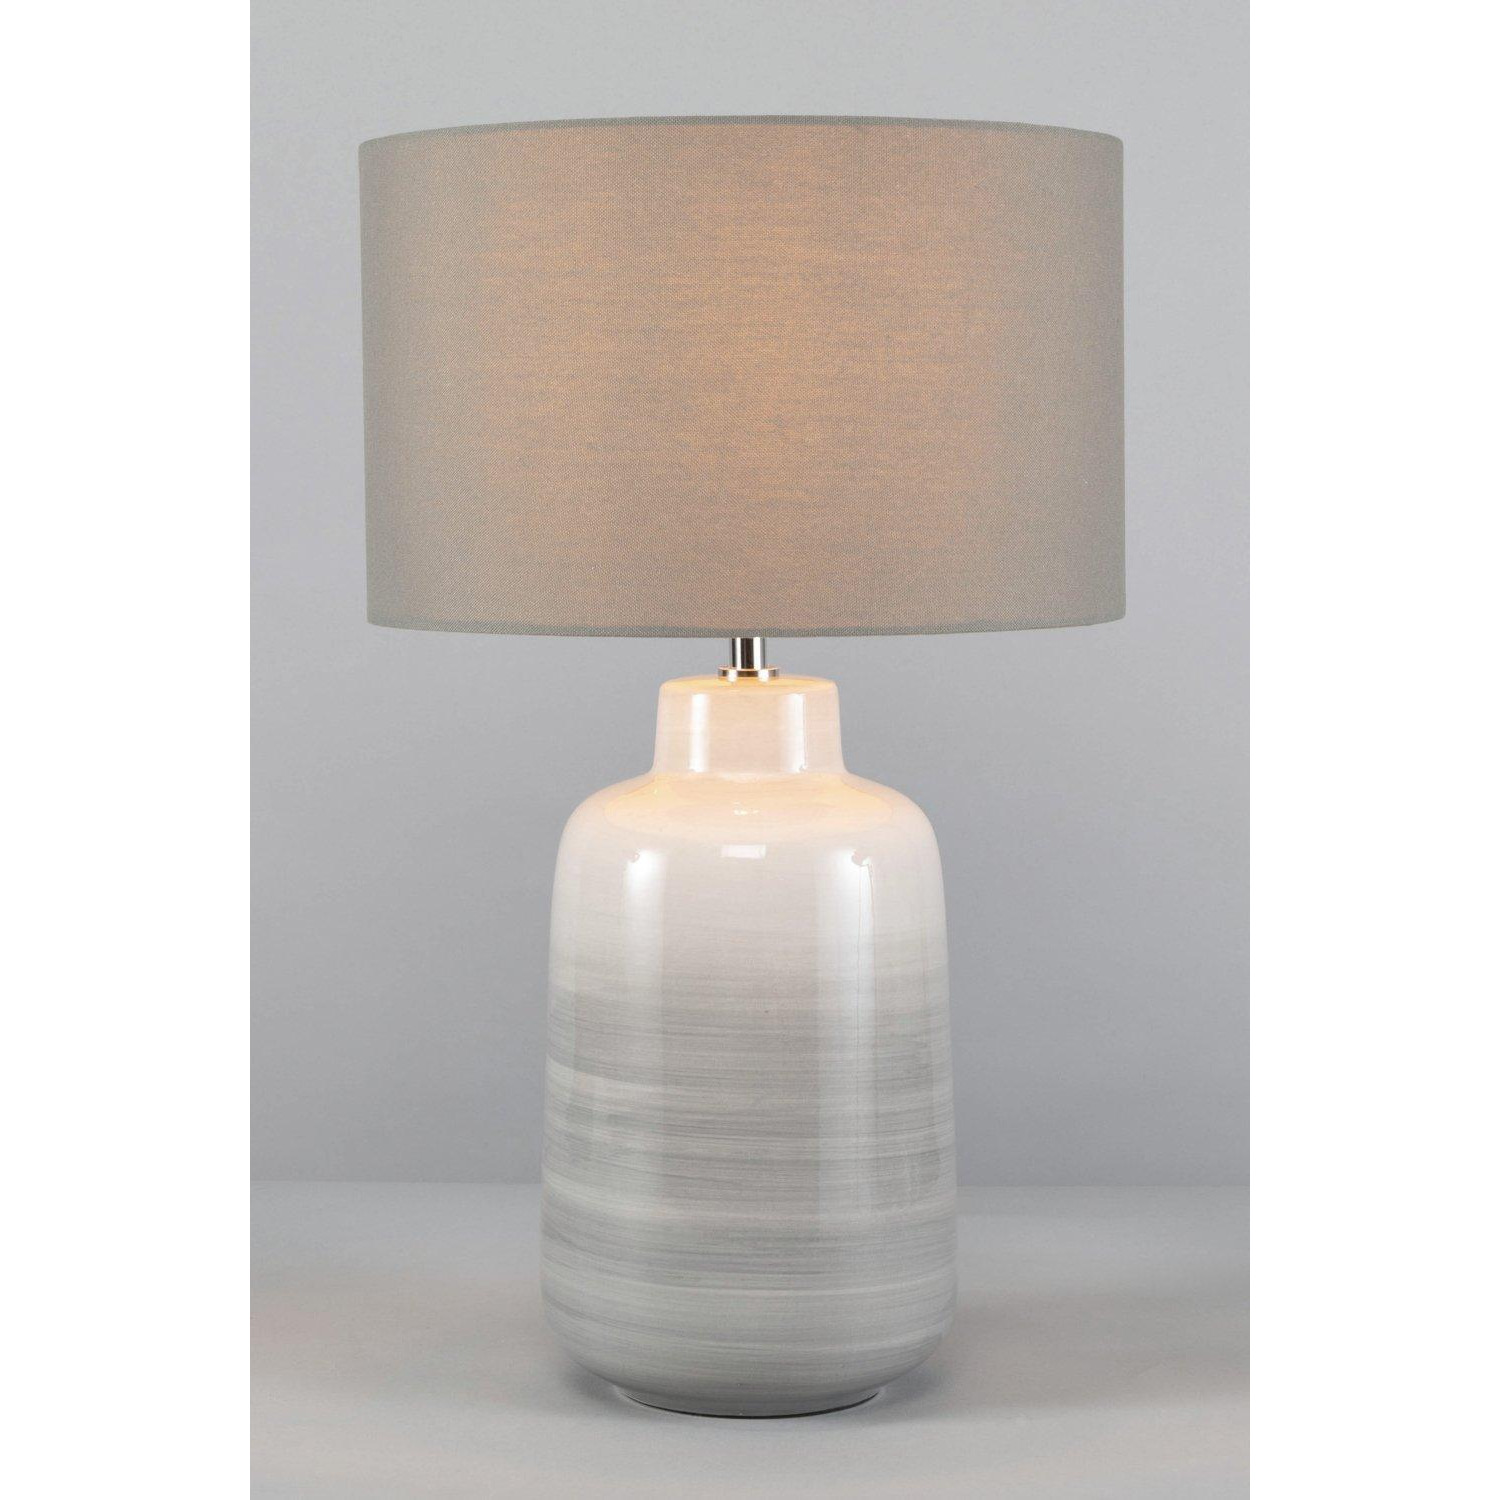 Cherry Table Lamp - image 1